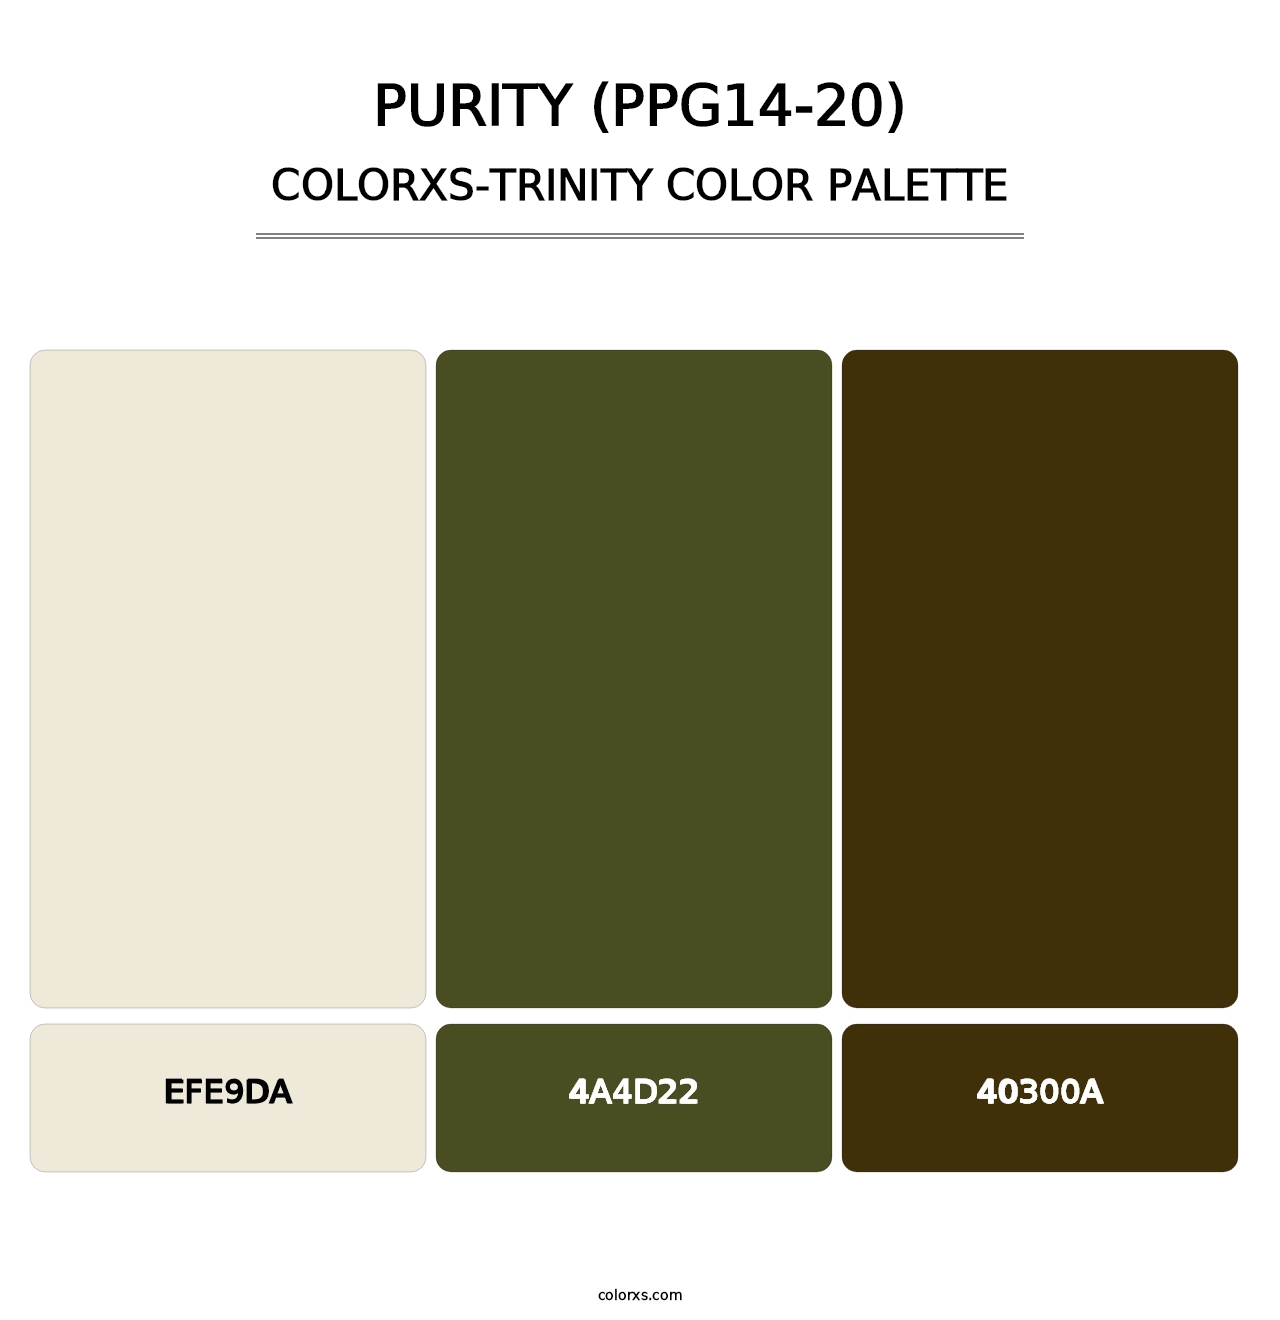 Purity (PPG14-20) - Colorxs Trinity Palette